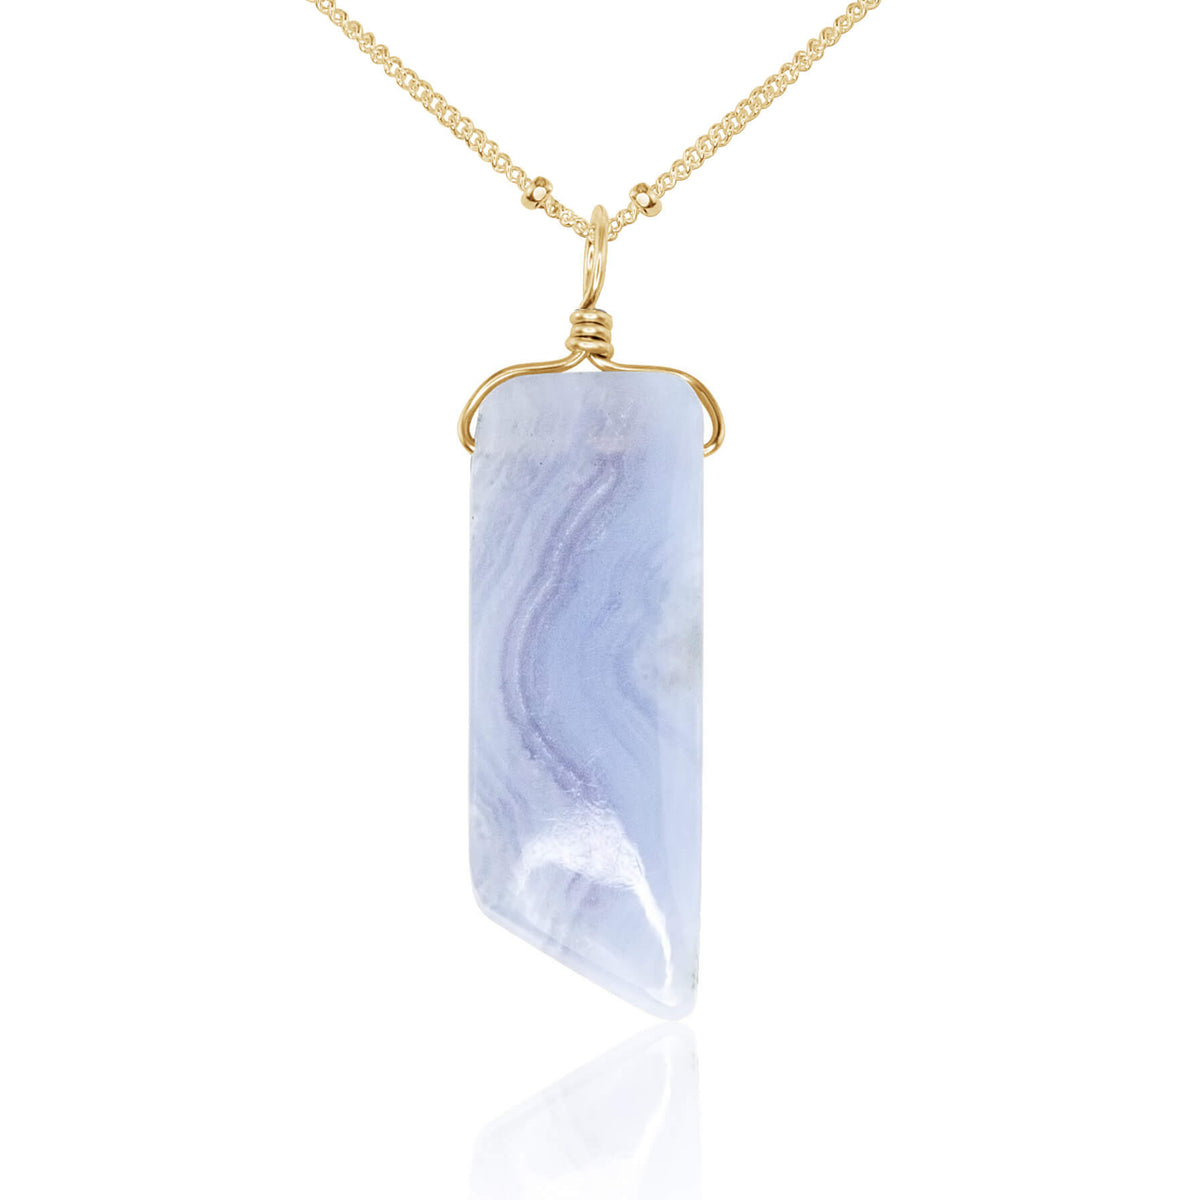 Smooth Point Pendant Necklace - Blue Lace Agate - 14K Gold Fill Satellite - Luna Tide Handmade Jewellery